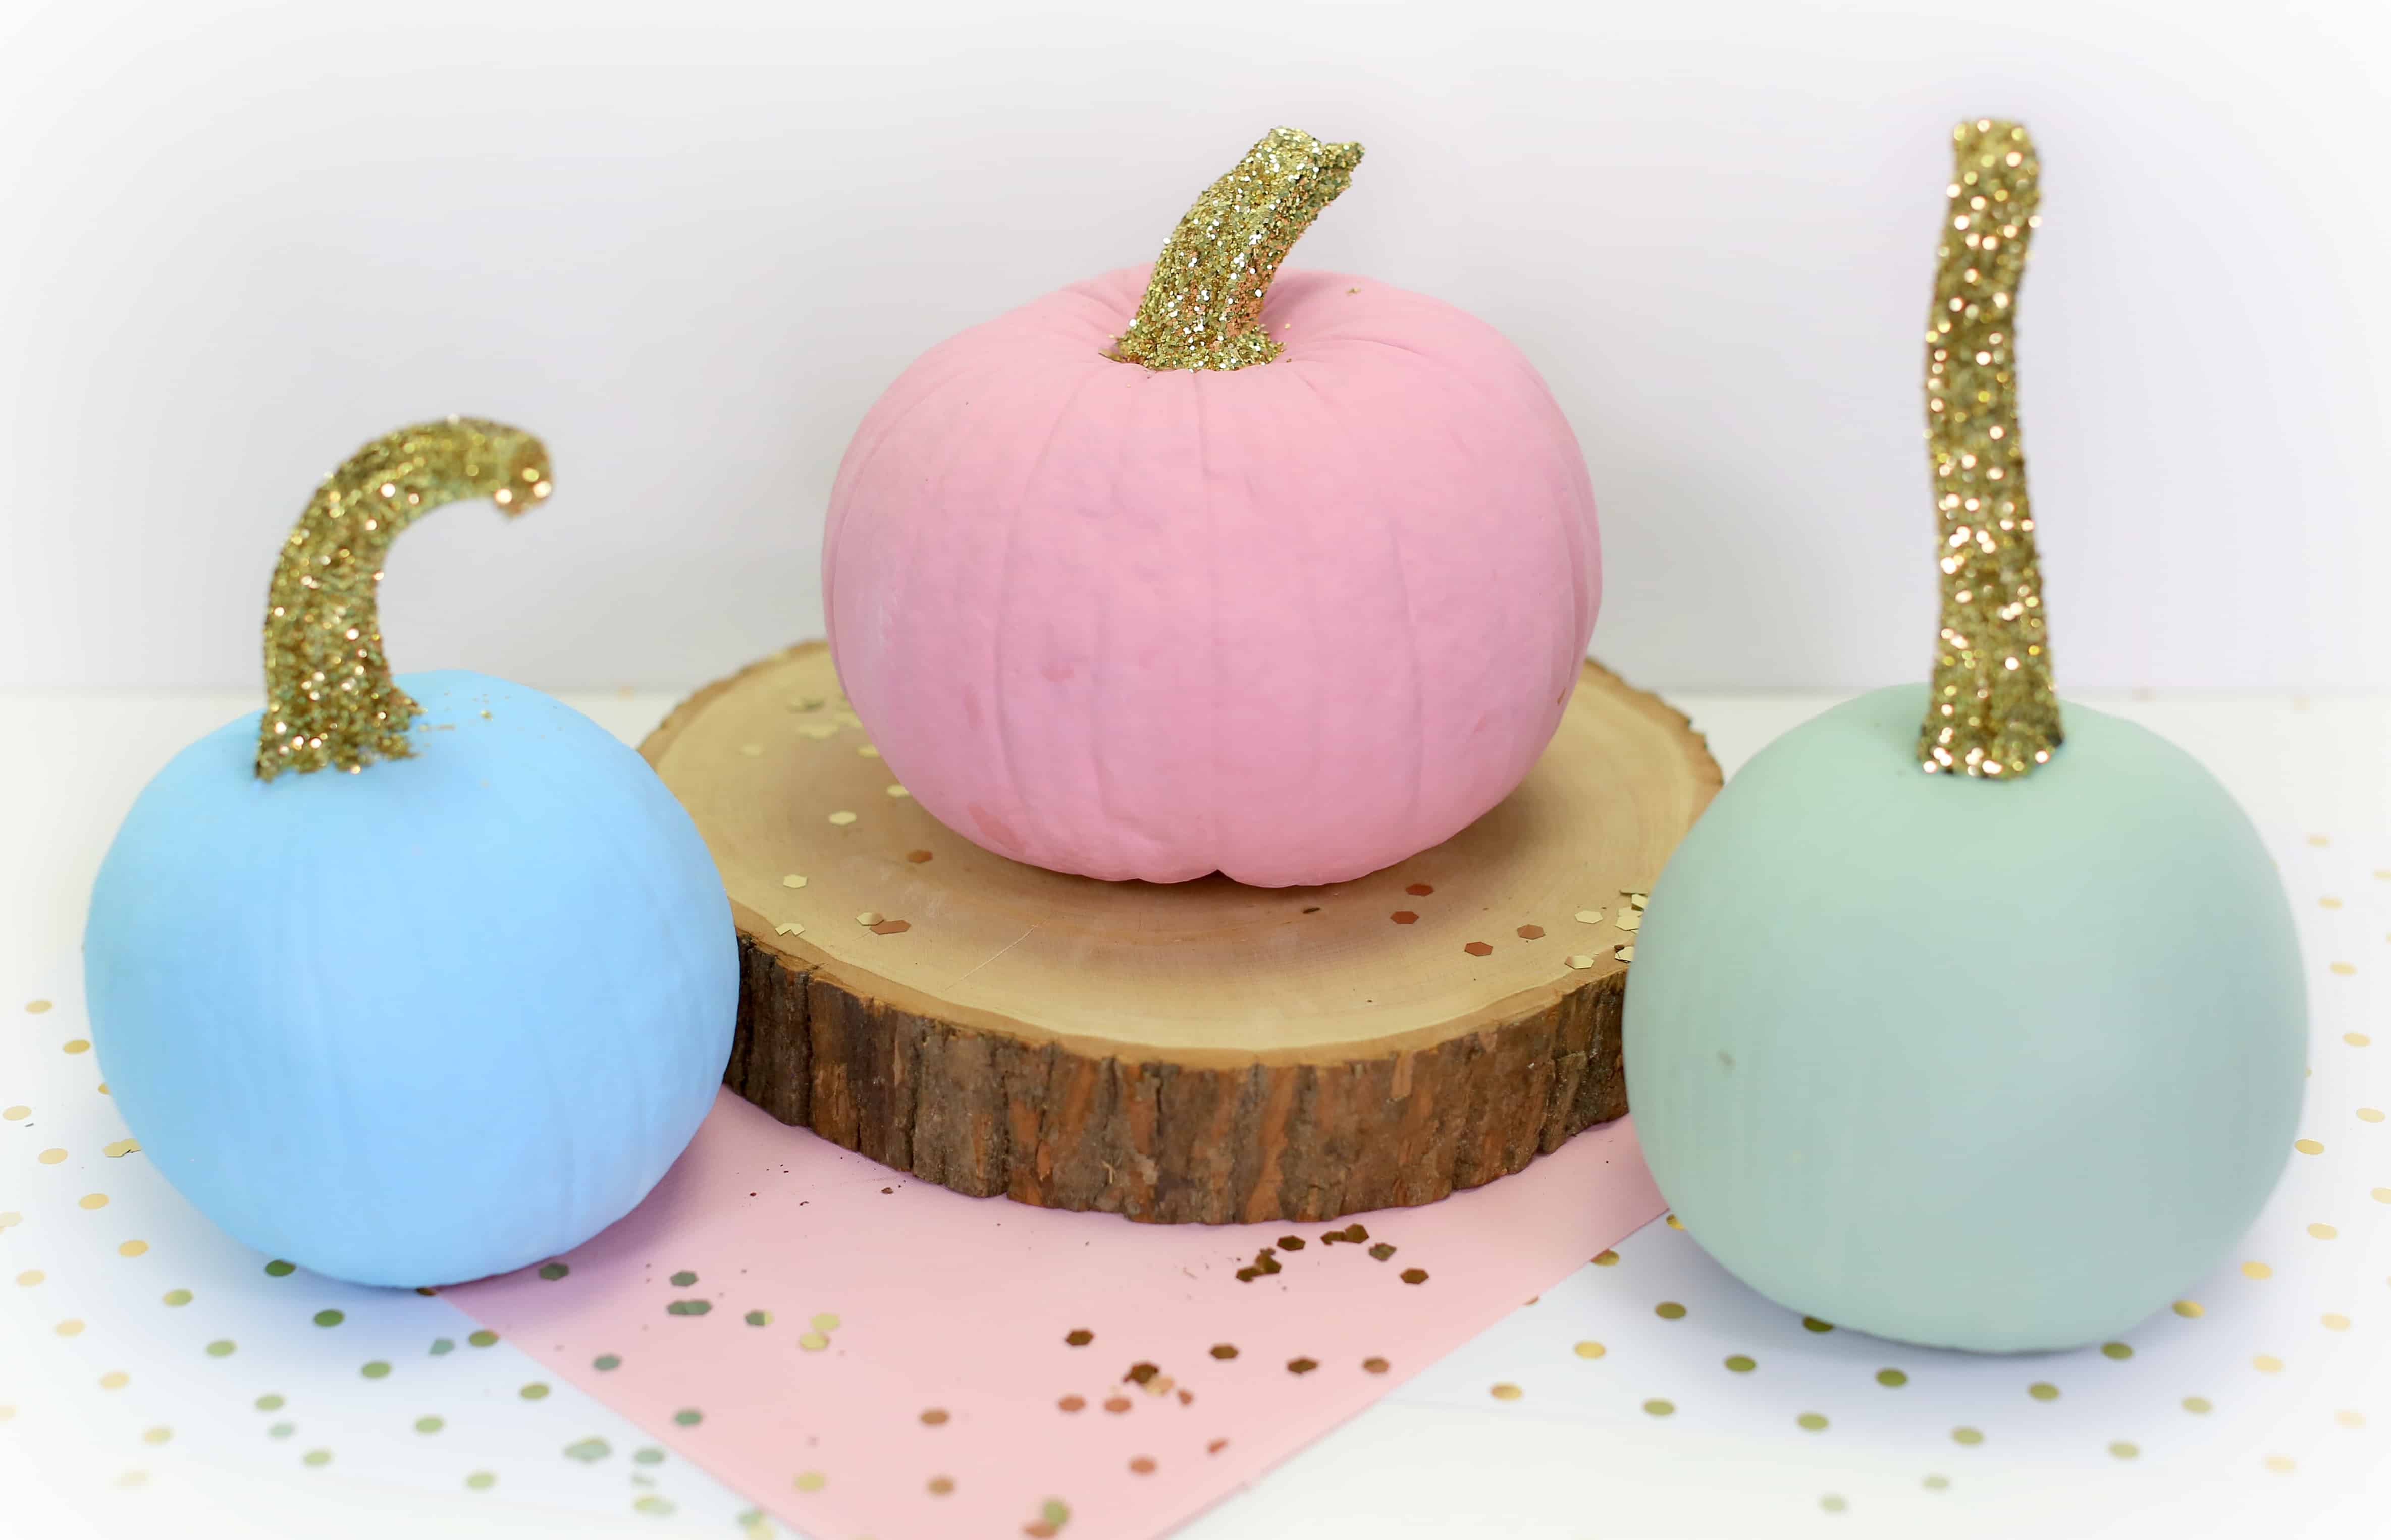 Paint your pumpkin in an unusual color such as pink for fall for an added touch of modern to your decor.